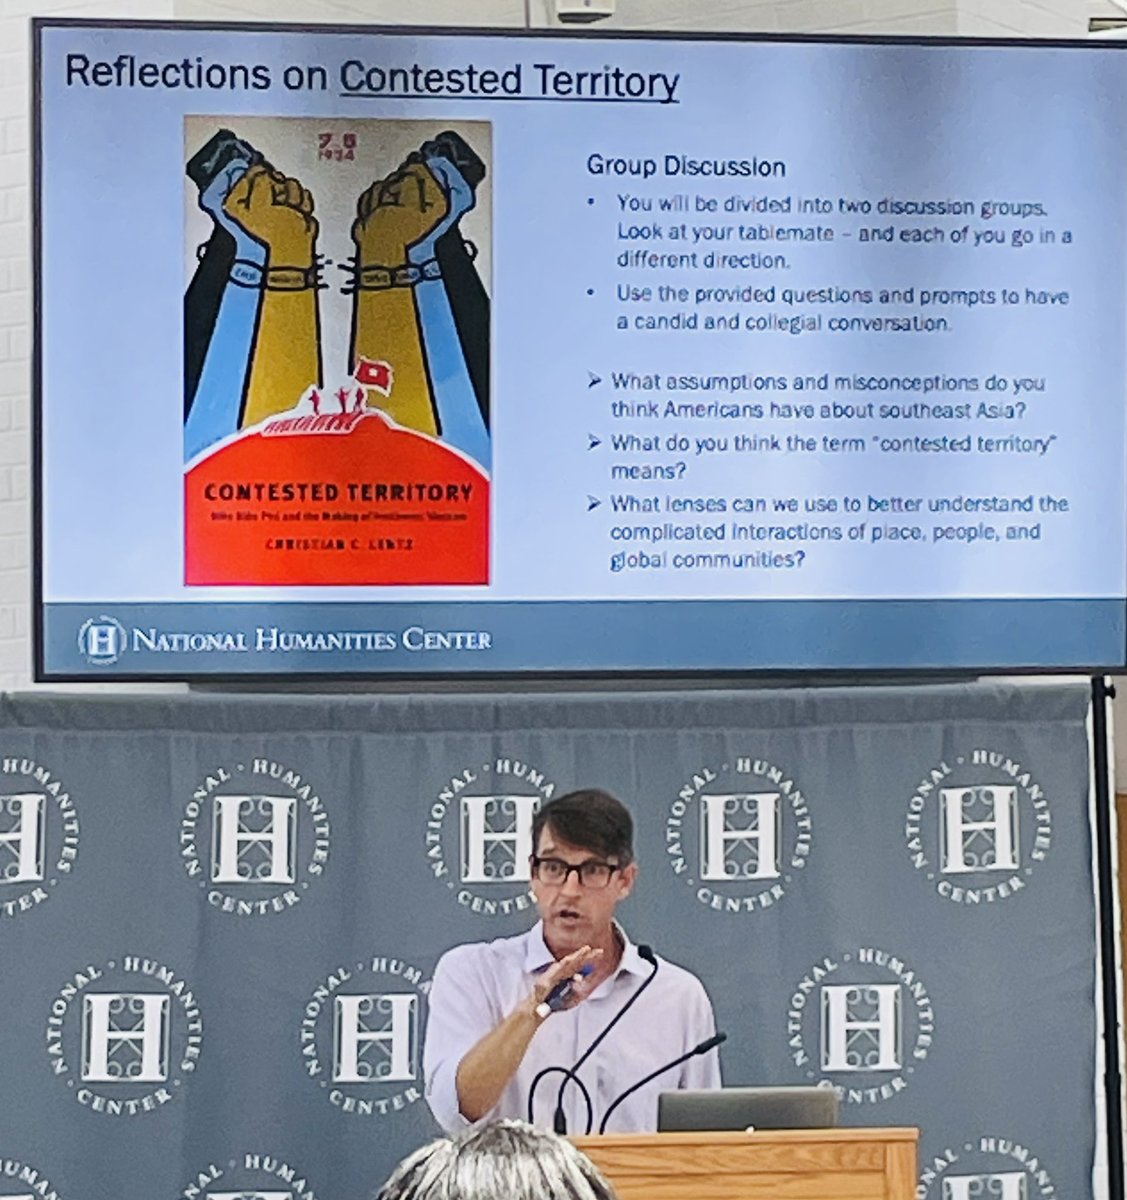 Just finished the first day of the “Contested Territory” institute at the National Humanities Center with excellent sessions on “Reframing Southeast Asia” by Morgan Pitelka of UNC and “How Did We Get Here? 1945-1975” by Anne Foster of Indiana State. #natlhumanities #humanities